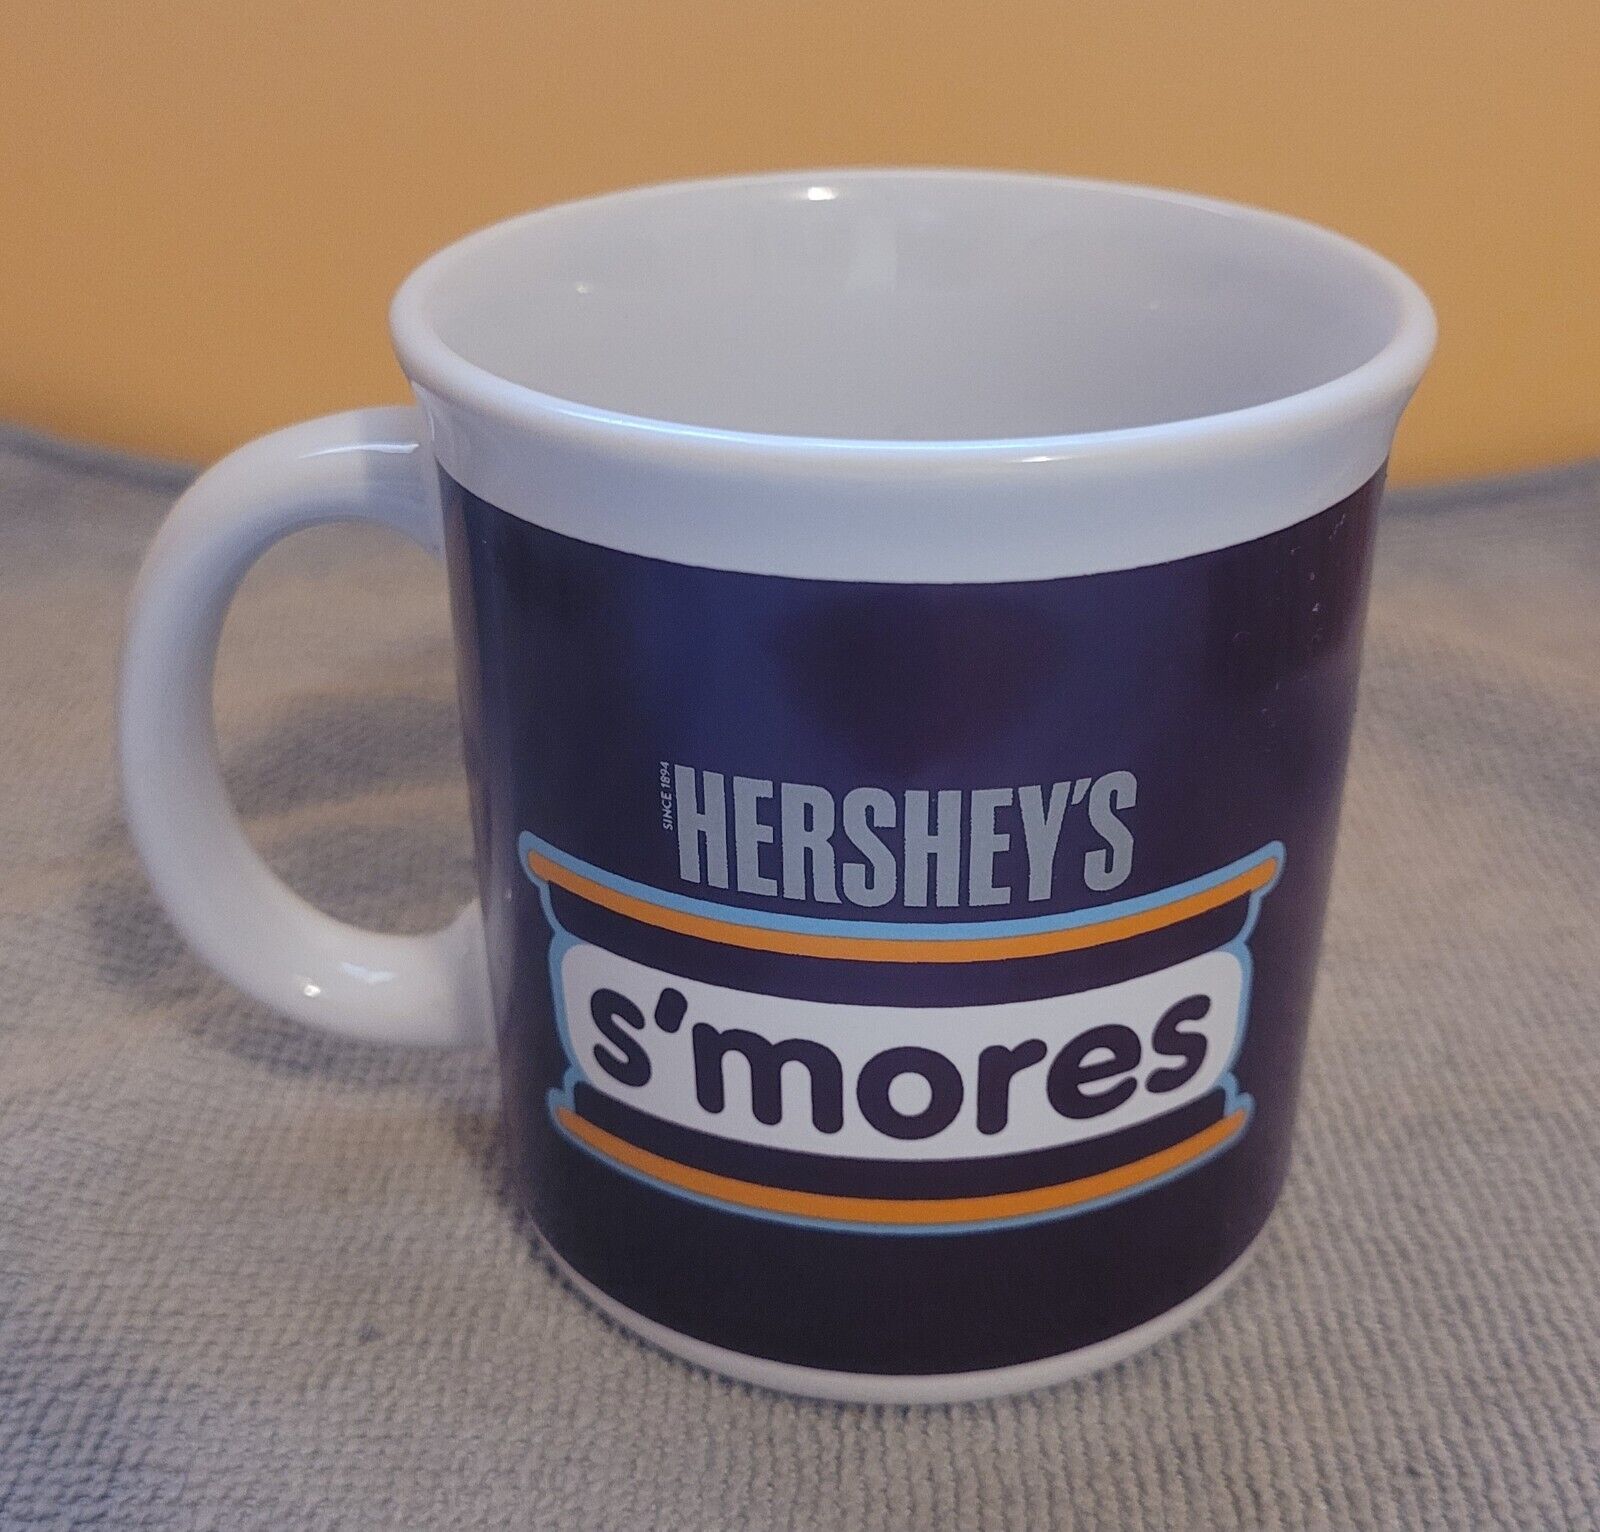 Hershey's S'mores Coffee Cup Mug Novelty Souvenir Advertising 